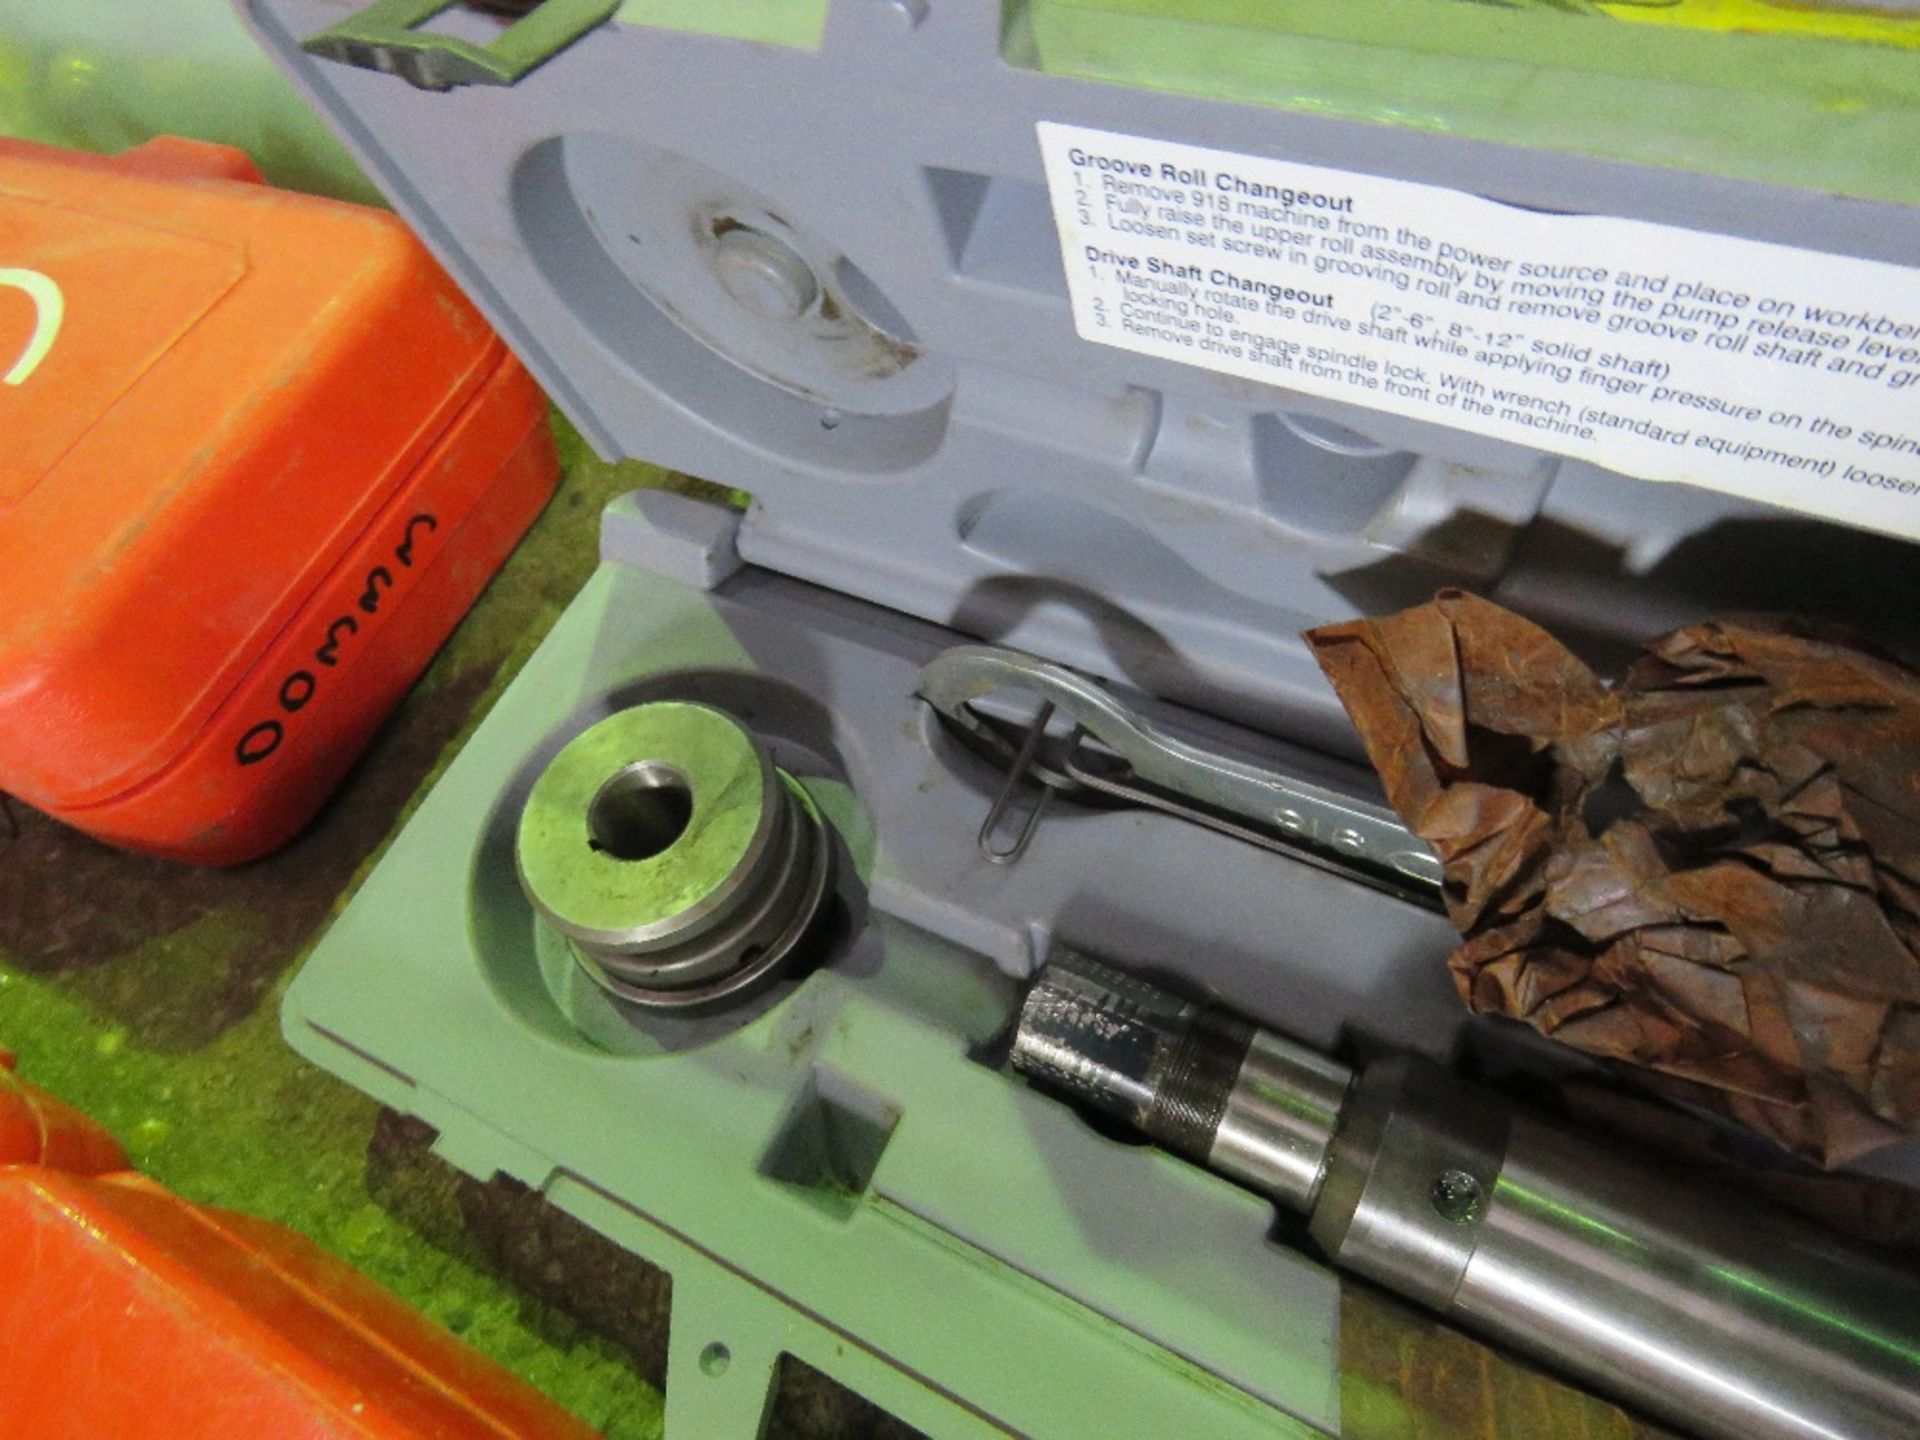 RIDGID GROOVE ROLL CHANGE OUT KIT. SOURCED FROM DEPOT CLEARANCE DUE TO A CHANGE IN COMPANY POLICY. - Image 2 of 3